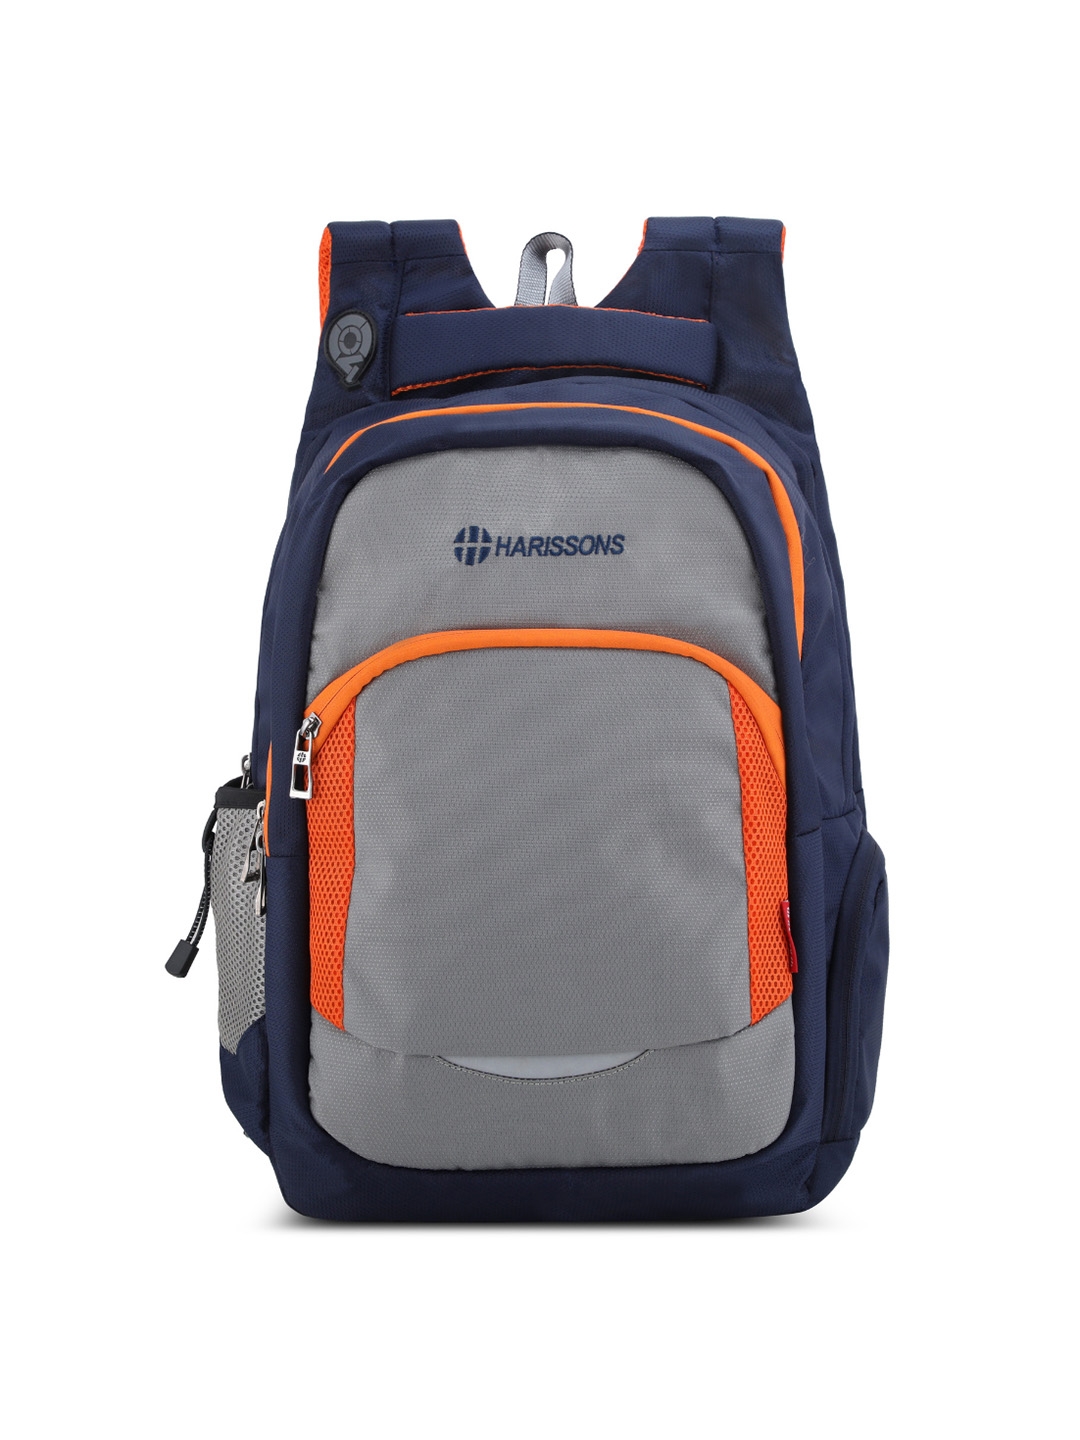 Harissons Unisex Grey   Navy Blue 15 Inch Laptop Backpack